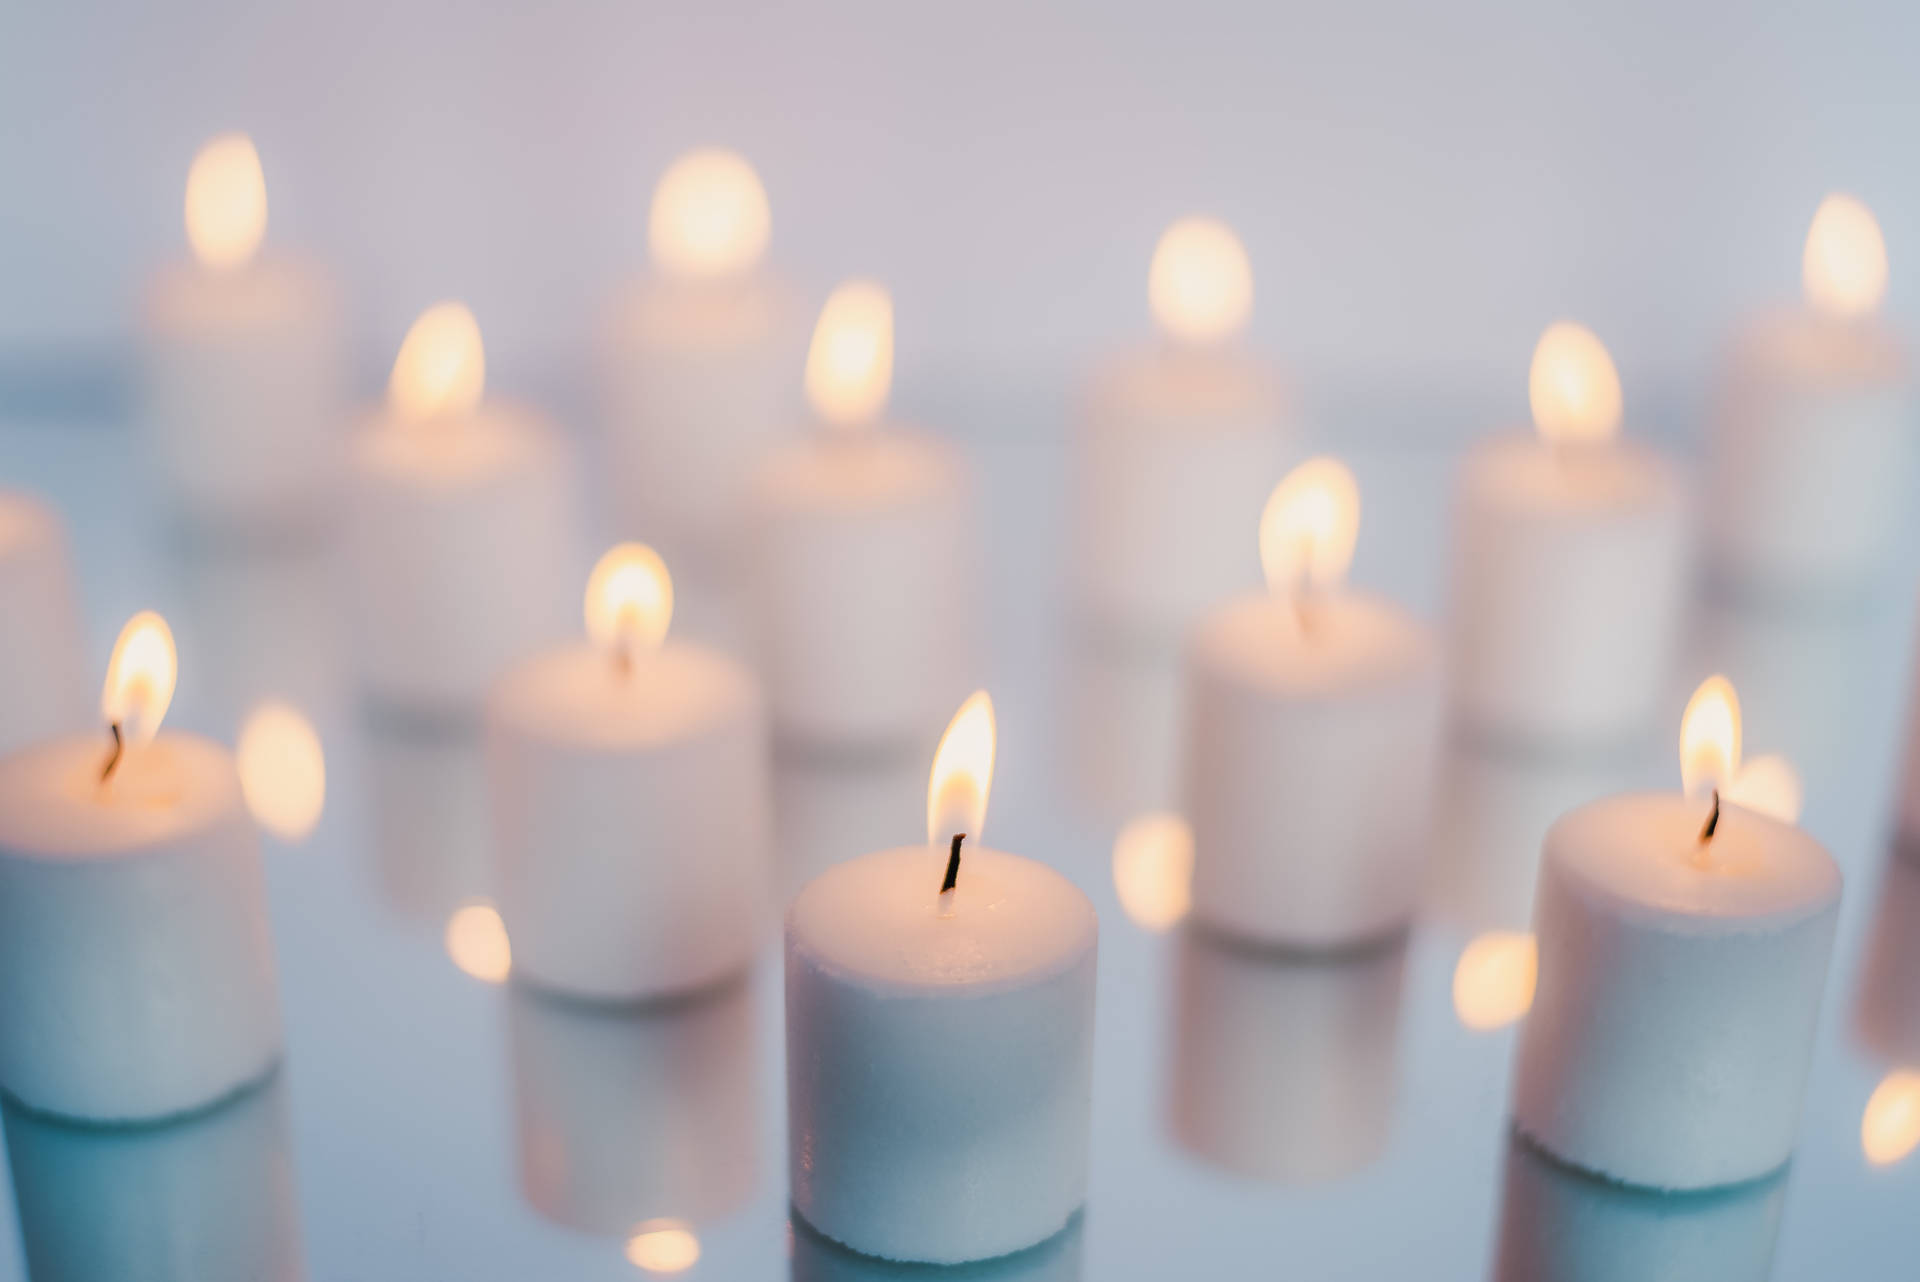 Candlelight Photos Download The BEST Free Candlelight Stock Photos  HD  Images